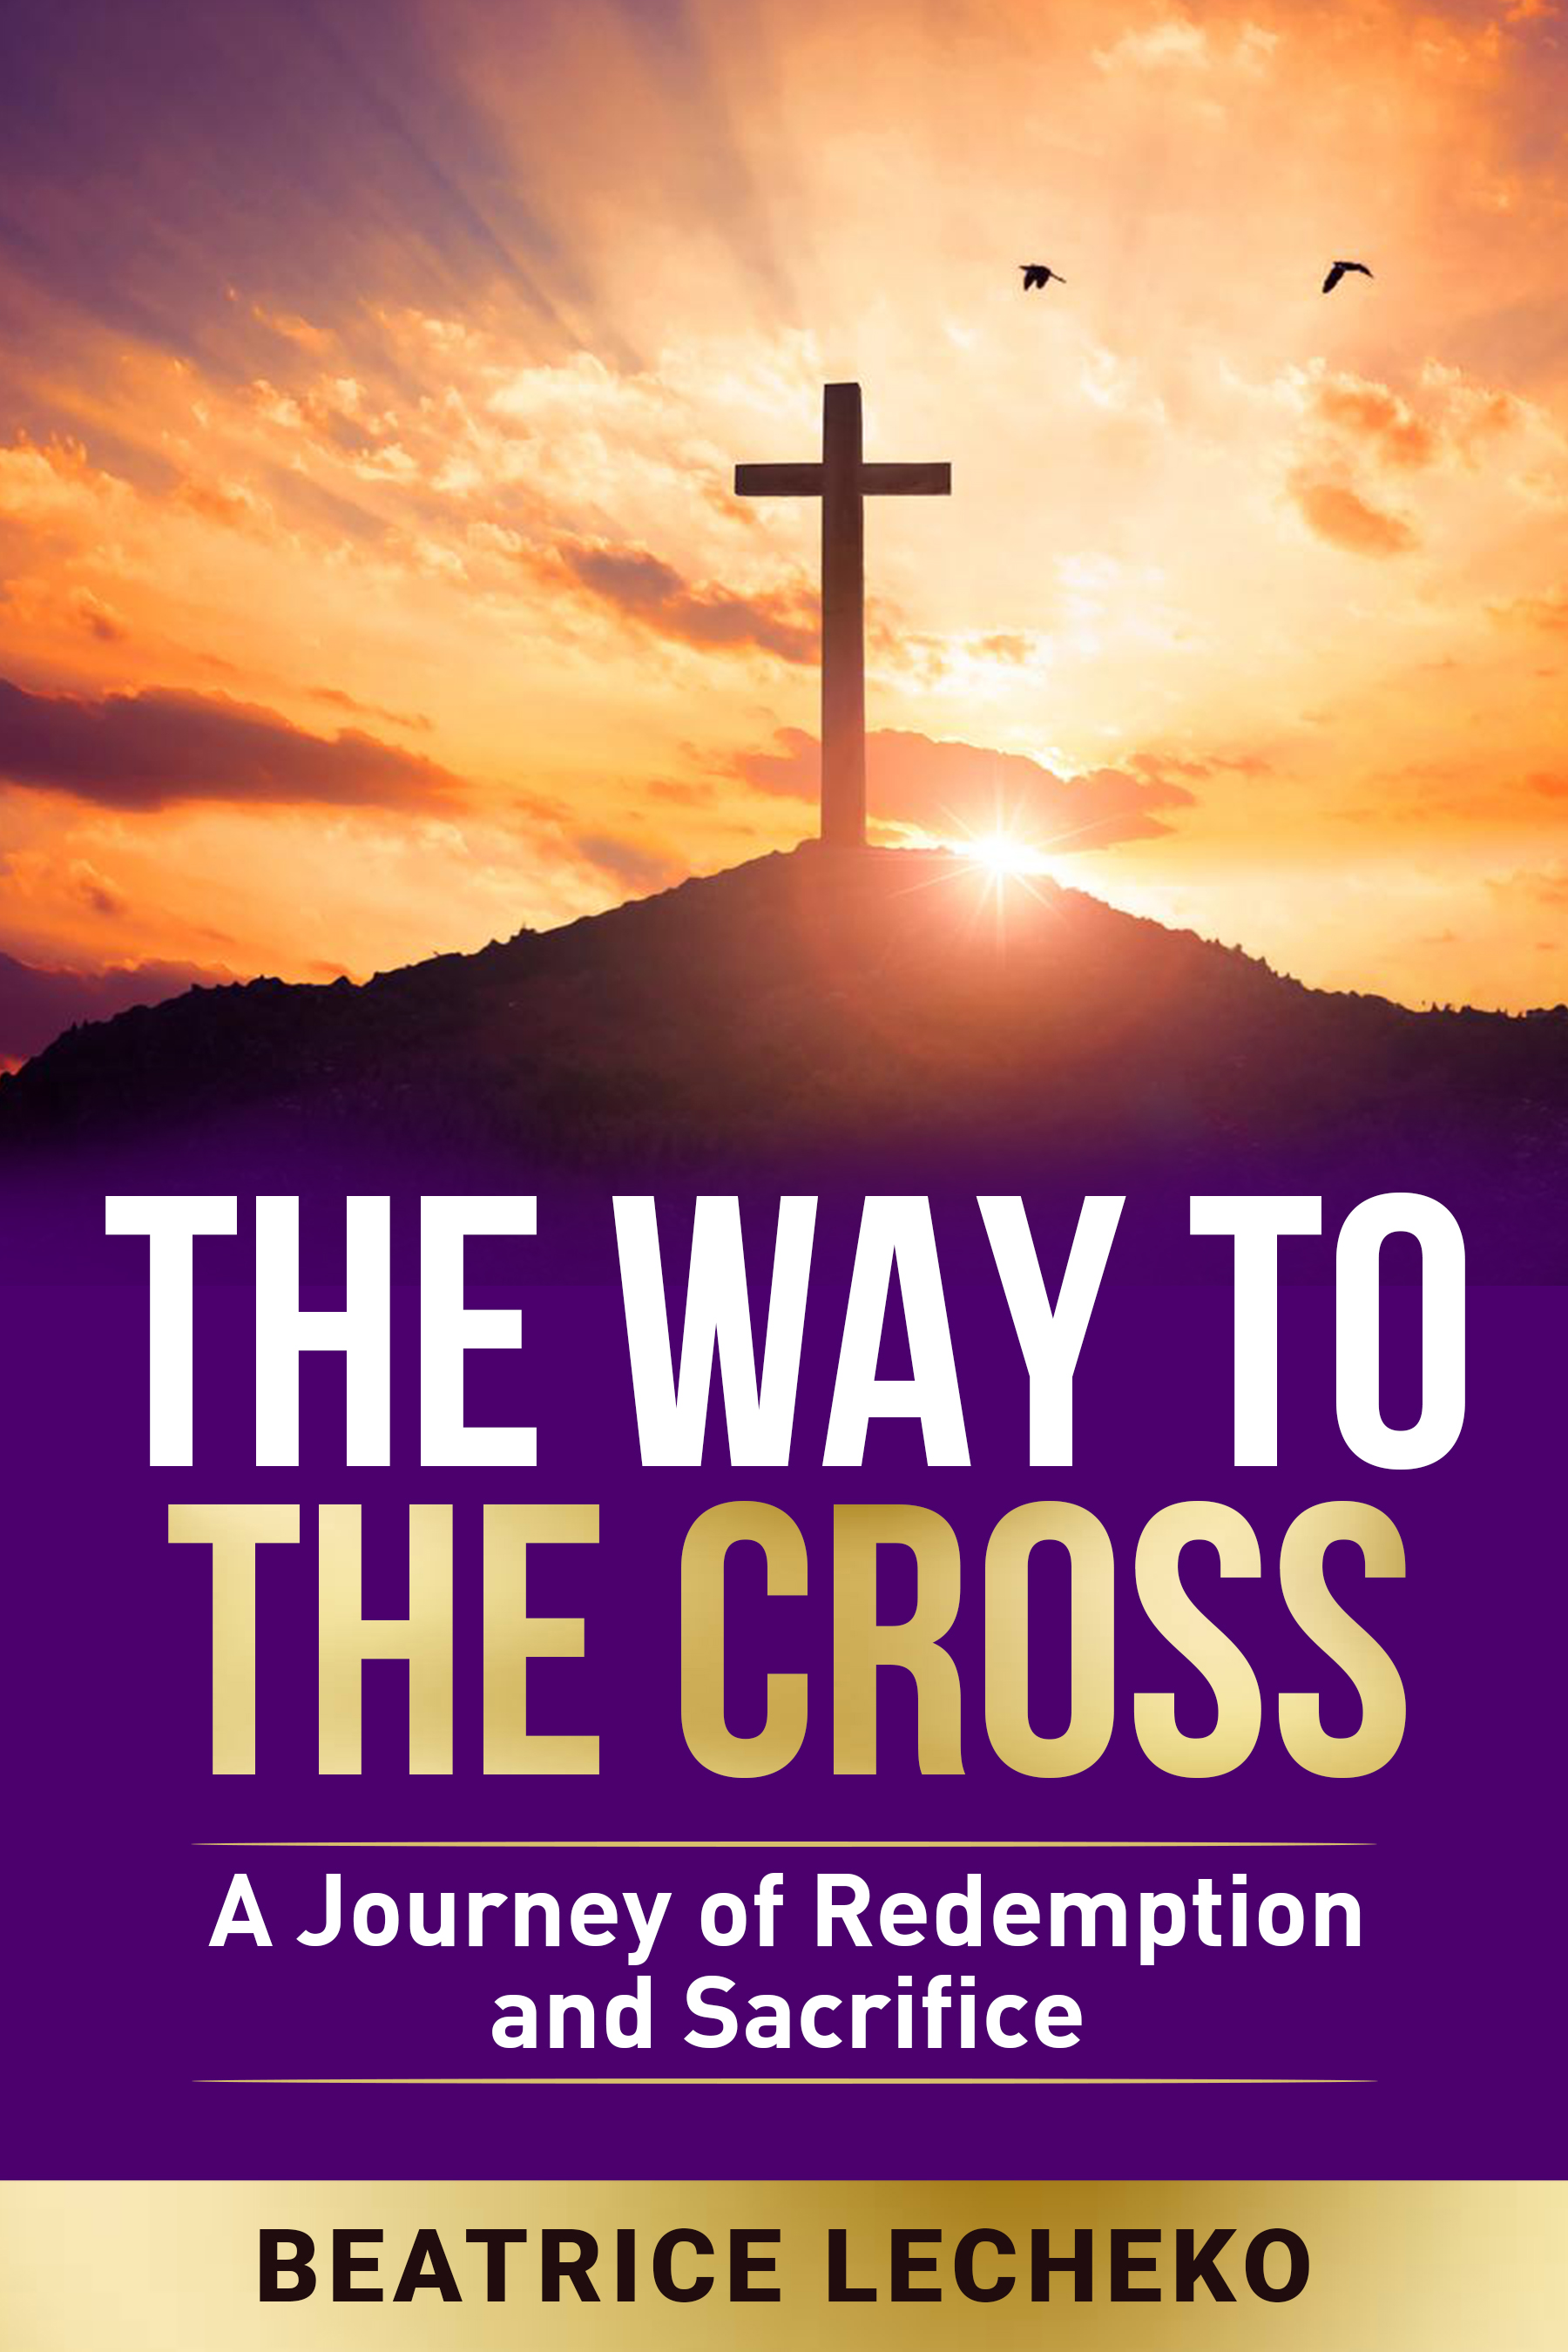 The way to the cross